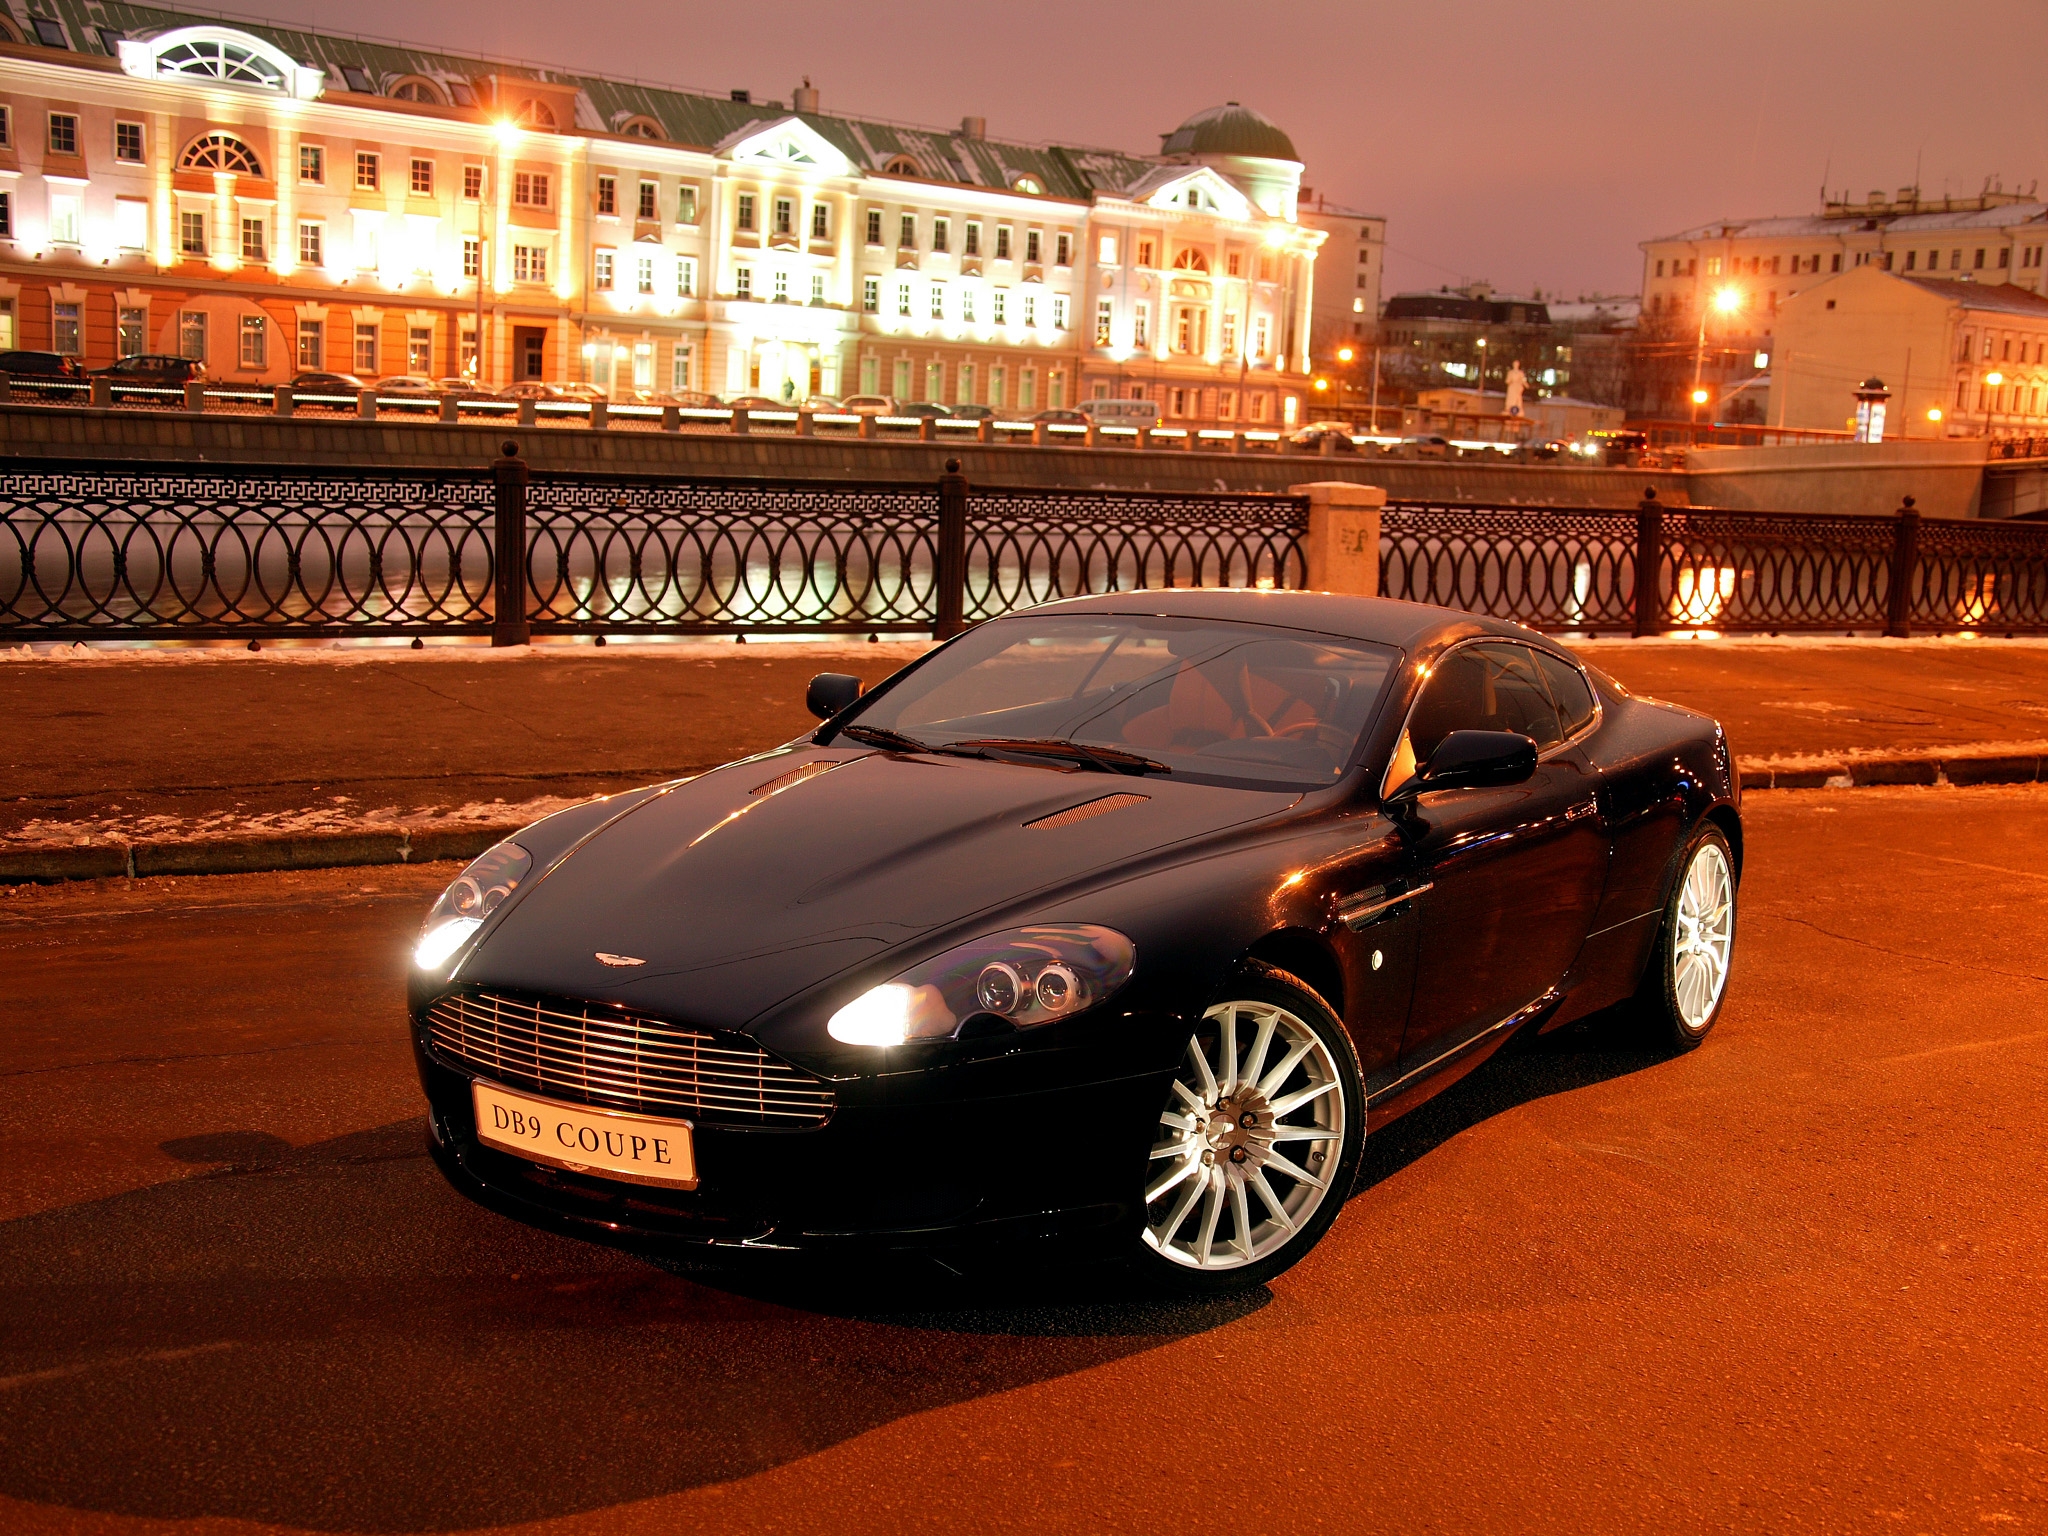 aston martin, houses, black, auto, cars, city, lights, asphalt, front view, style, 2004, db9 lock screen backgrounds